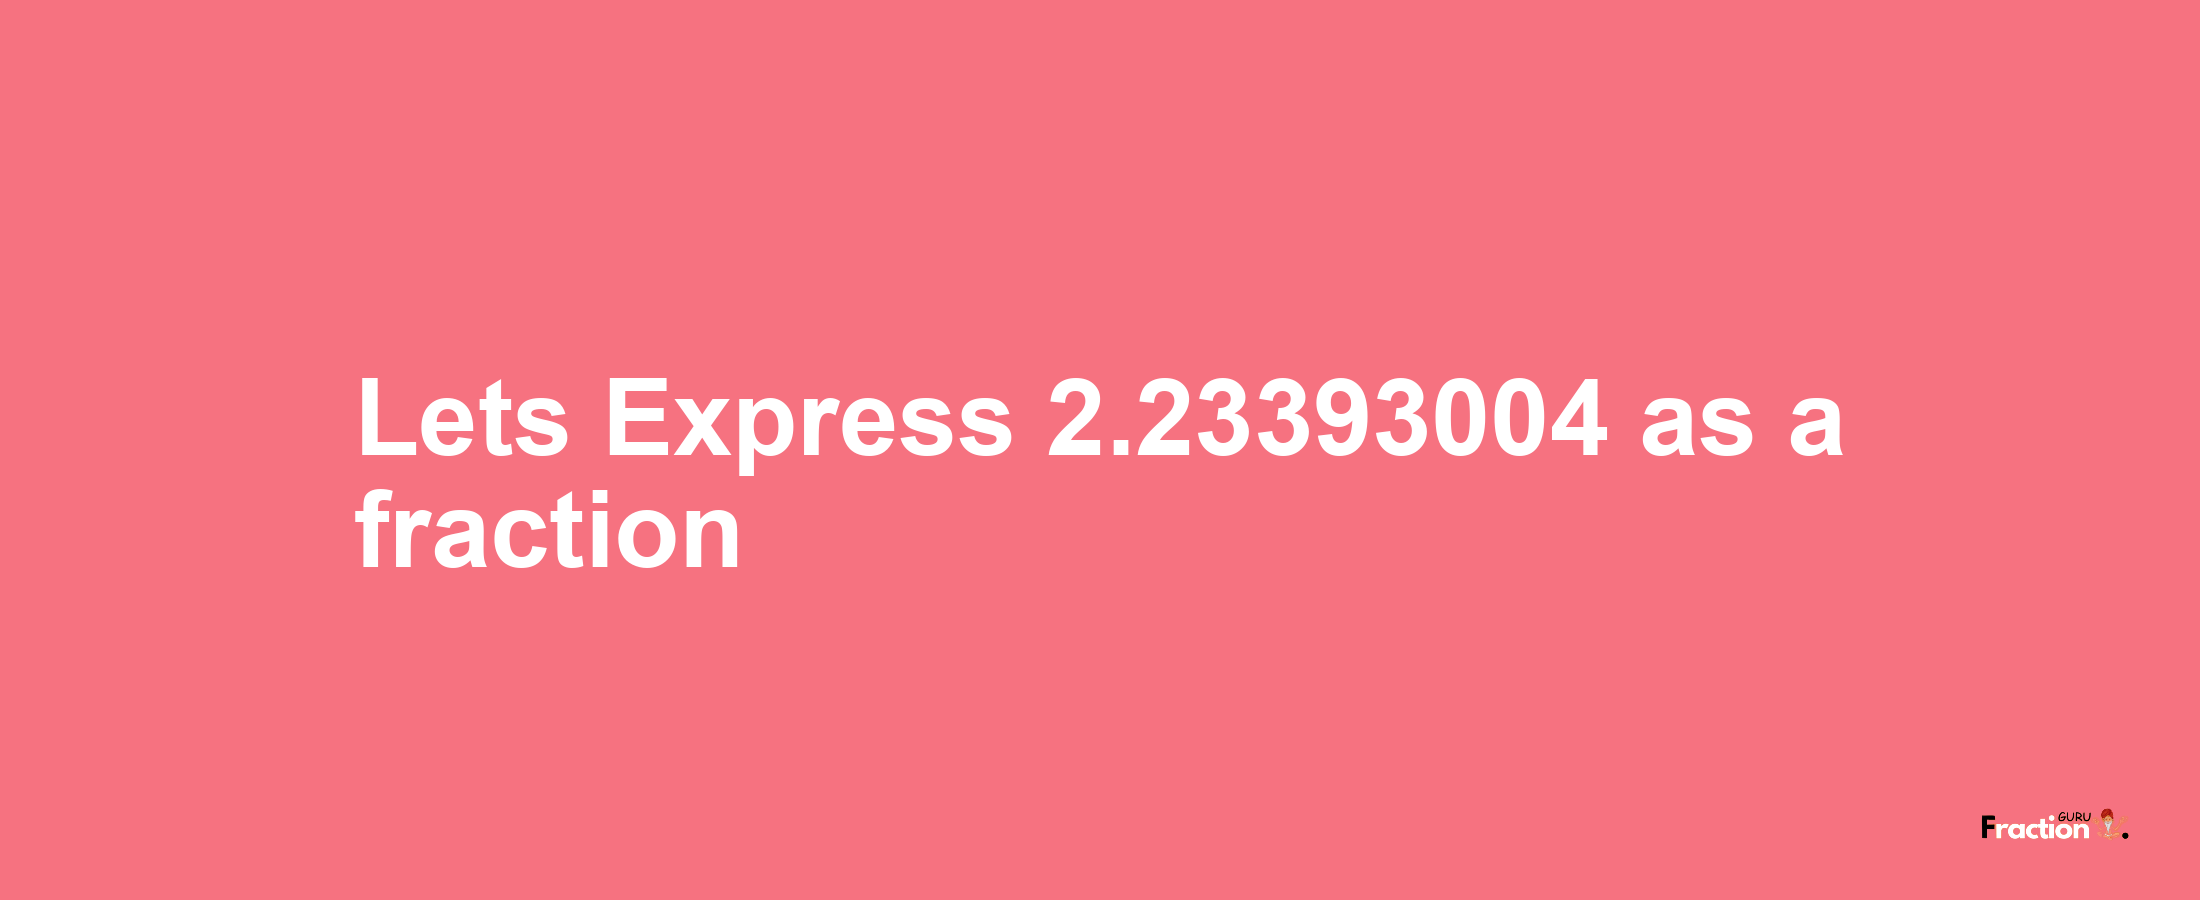 Lets Express 2.23393004 as afraction